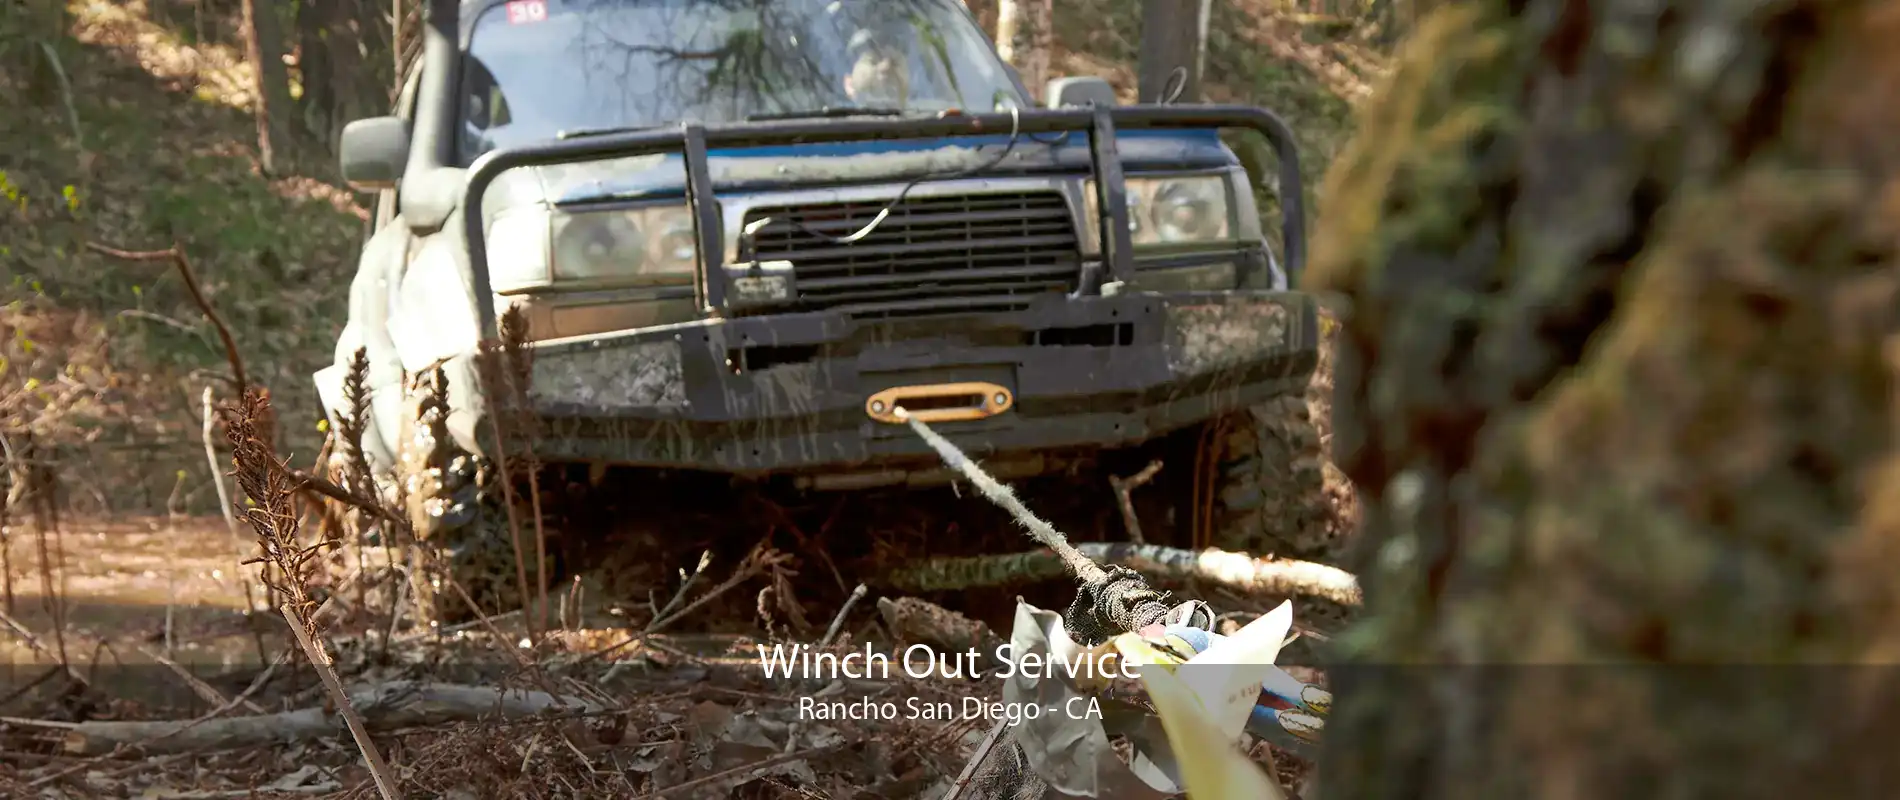 Winch Out Service Rancho San Diego - CA